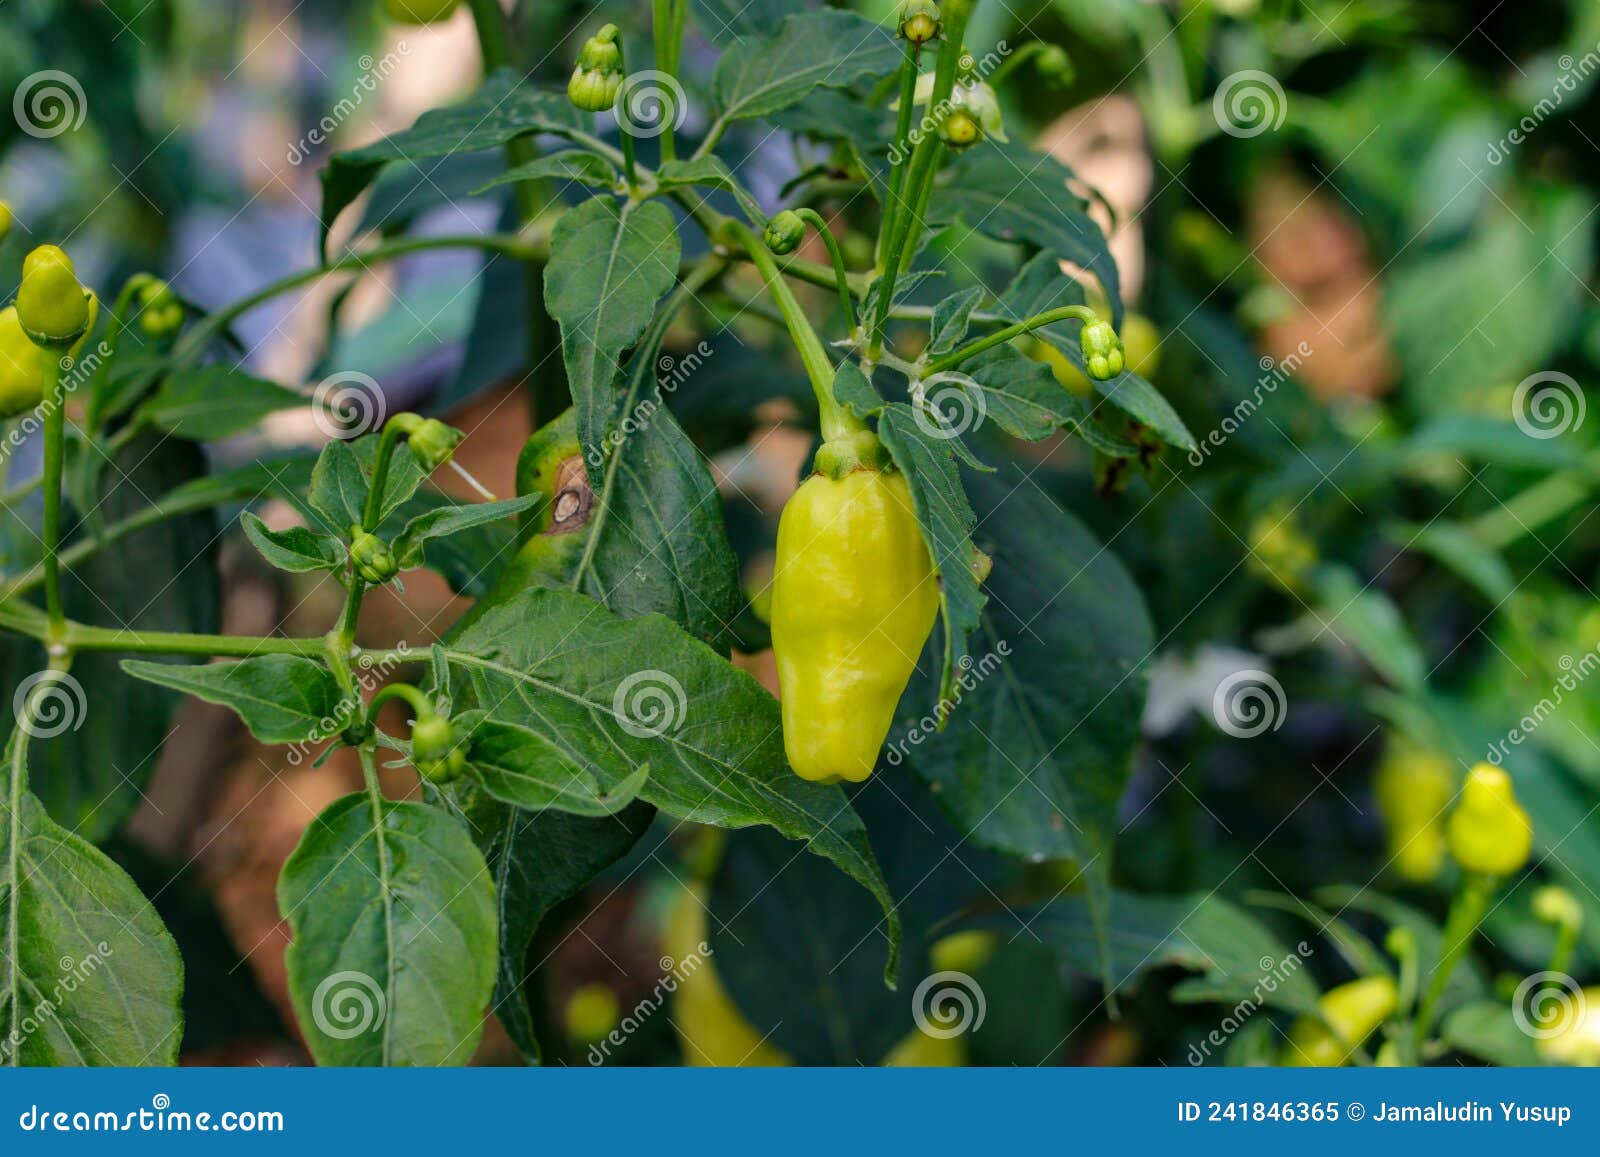 datil peppers or cayenne pepper growing on tree branches in the garden